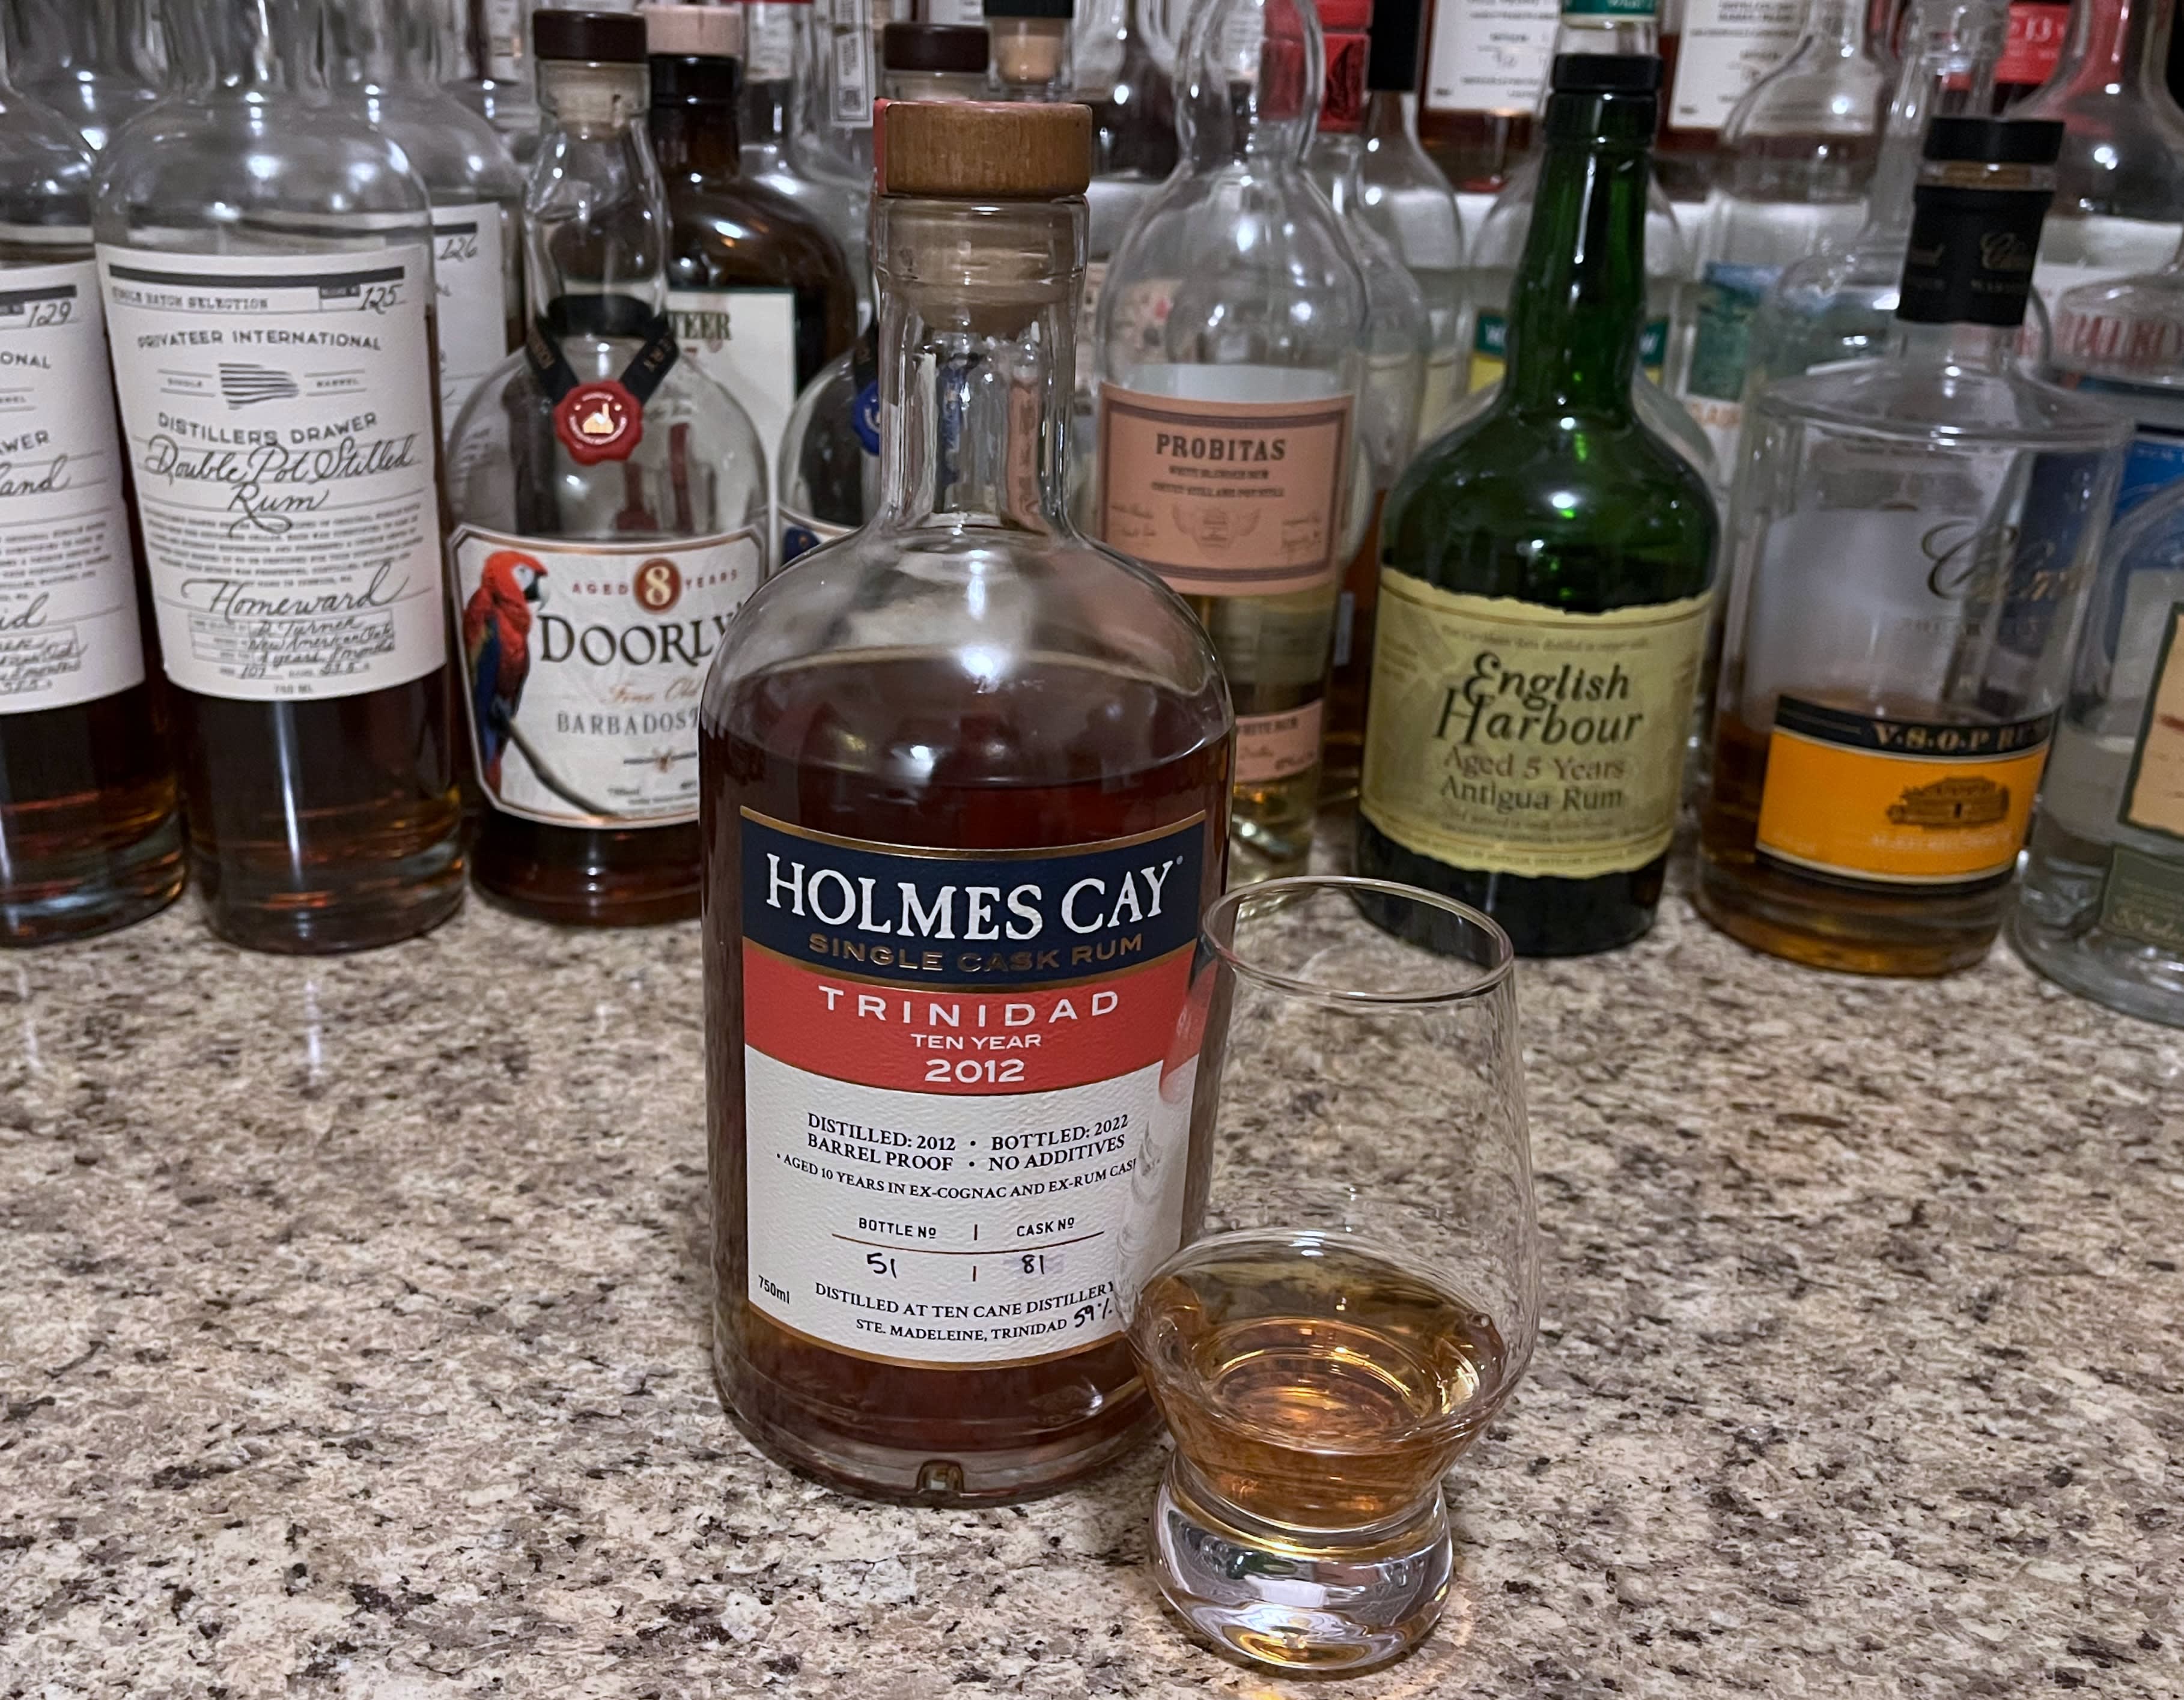 Review: 10 Cane Rum - Drinkhacker